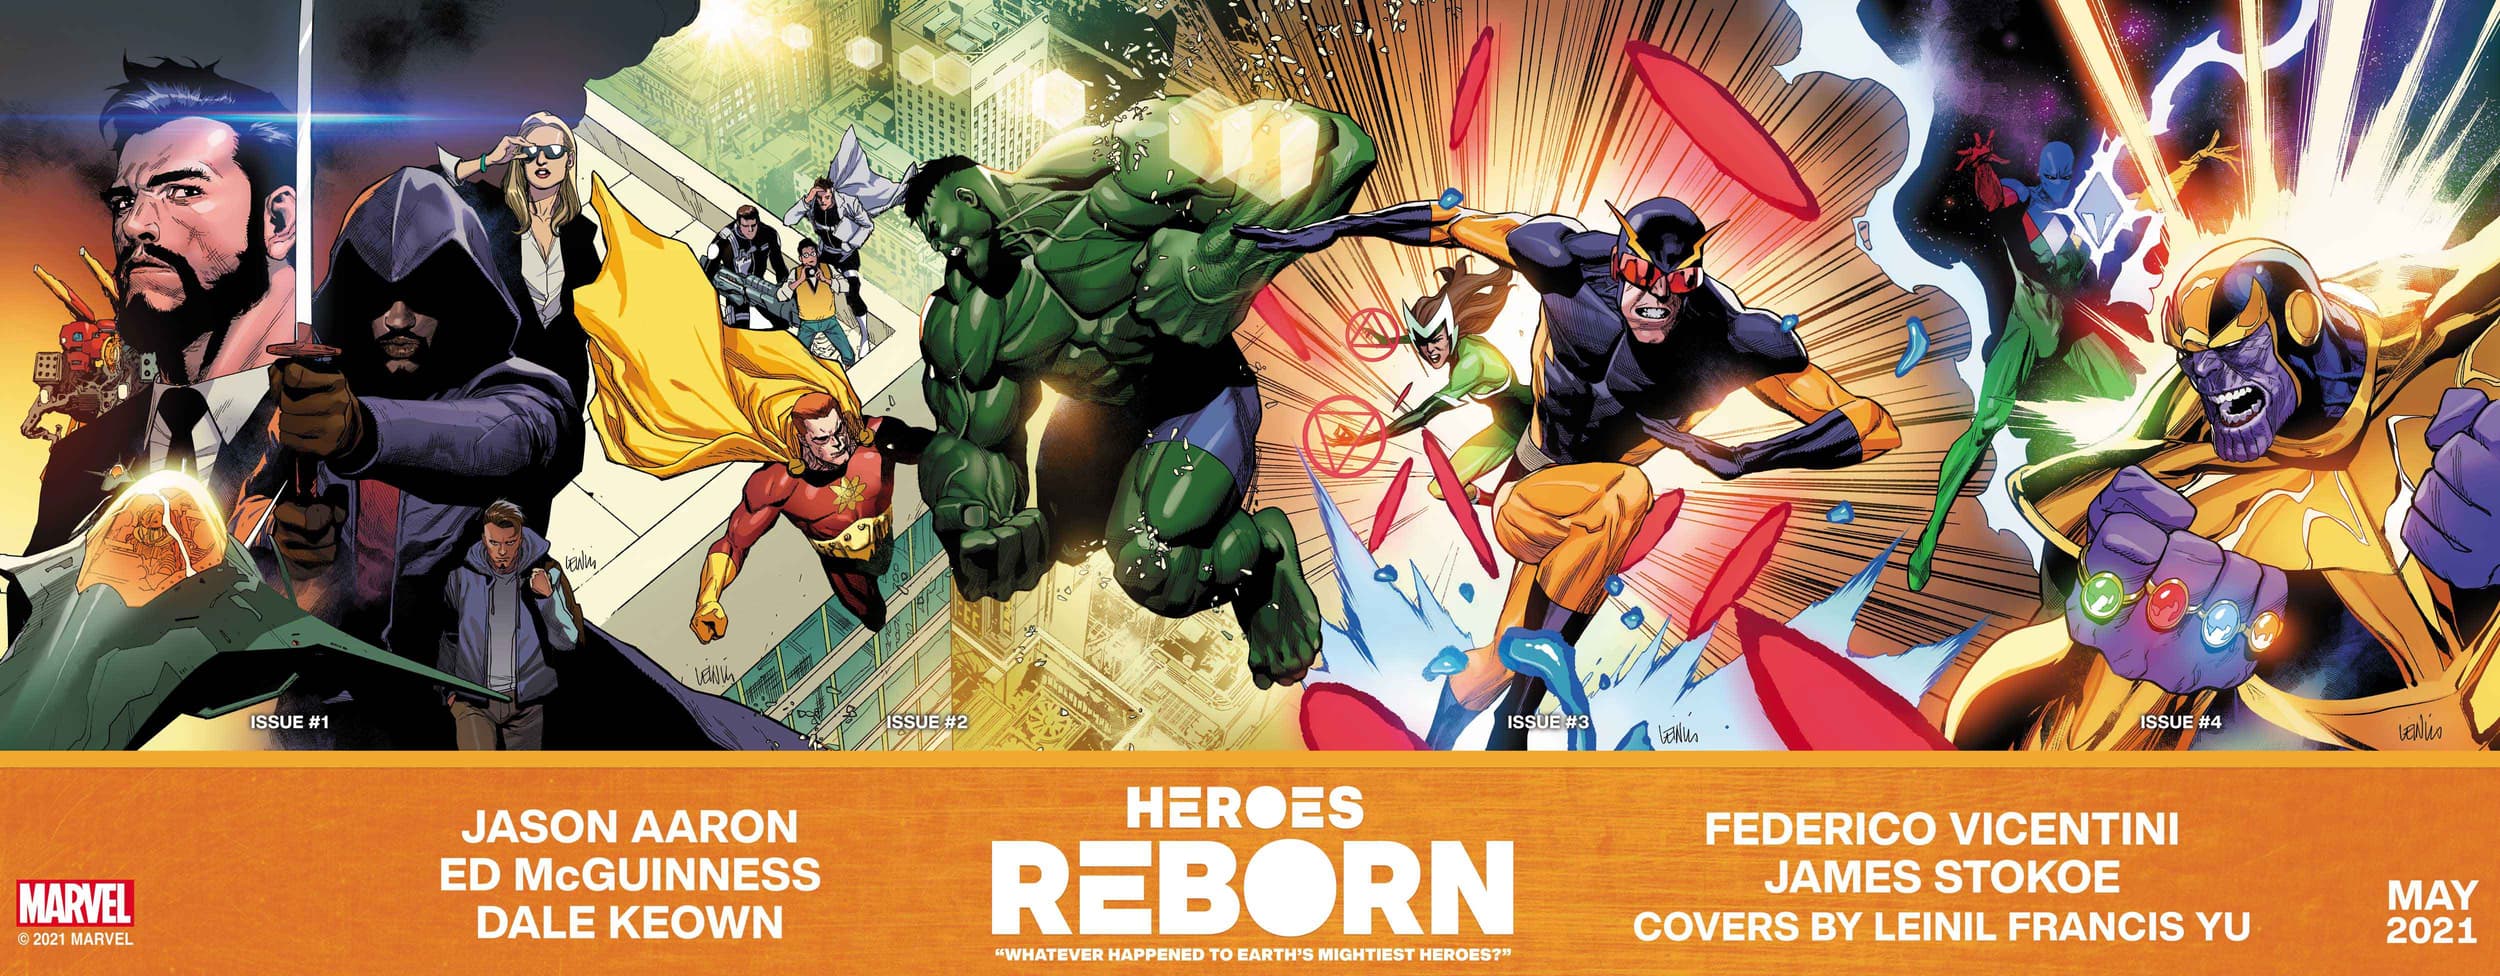 HEROES REBORN Connected Covers by Leinil Francis Yu